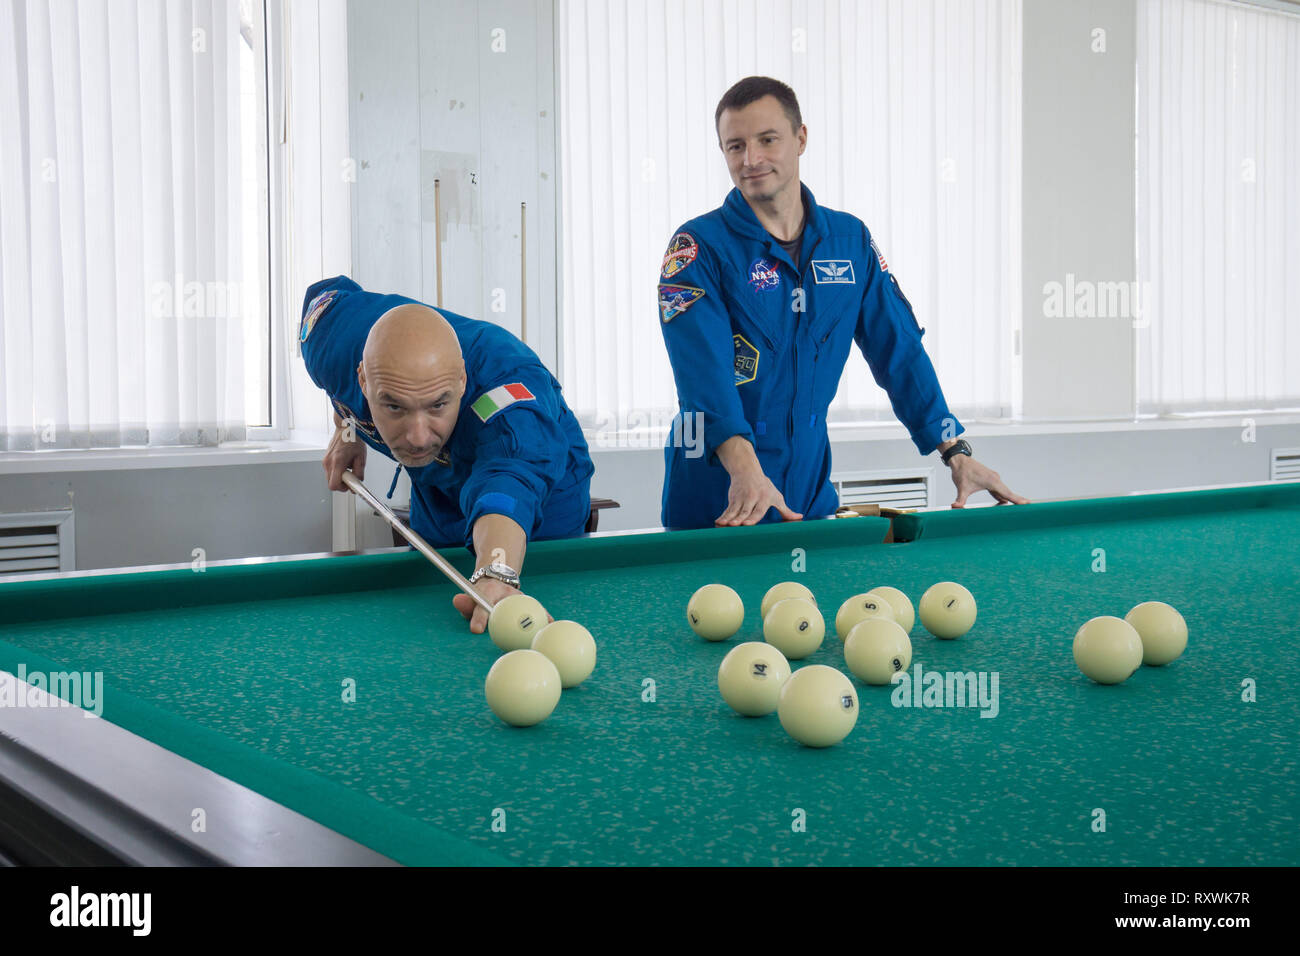 International Space Station Expedition 59 backup crew members Luca Parmitano of the European Space Agency (left) and Drew Morgan of NASA (right) take a moment from pre-launch training for a game of billiards at the Baikonur Cosmodrome March 7, 2019 in Baikonur, Kazakhstan. Expedition 59 crew: Christina Koch of NASA, Alexey Ovchinin of Roscosmos, and Nick Hague of NASA will launch March 14th onboard the Soyuz MS-12 spacecraft for a six-and-a-half month mission on the International Space Station. Stock Photo